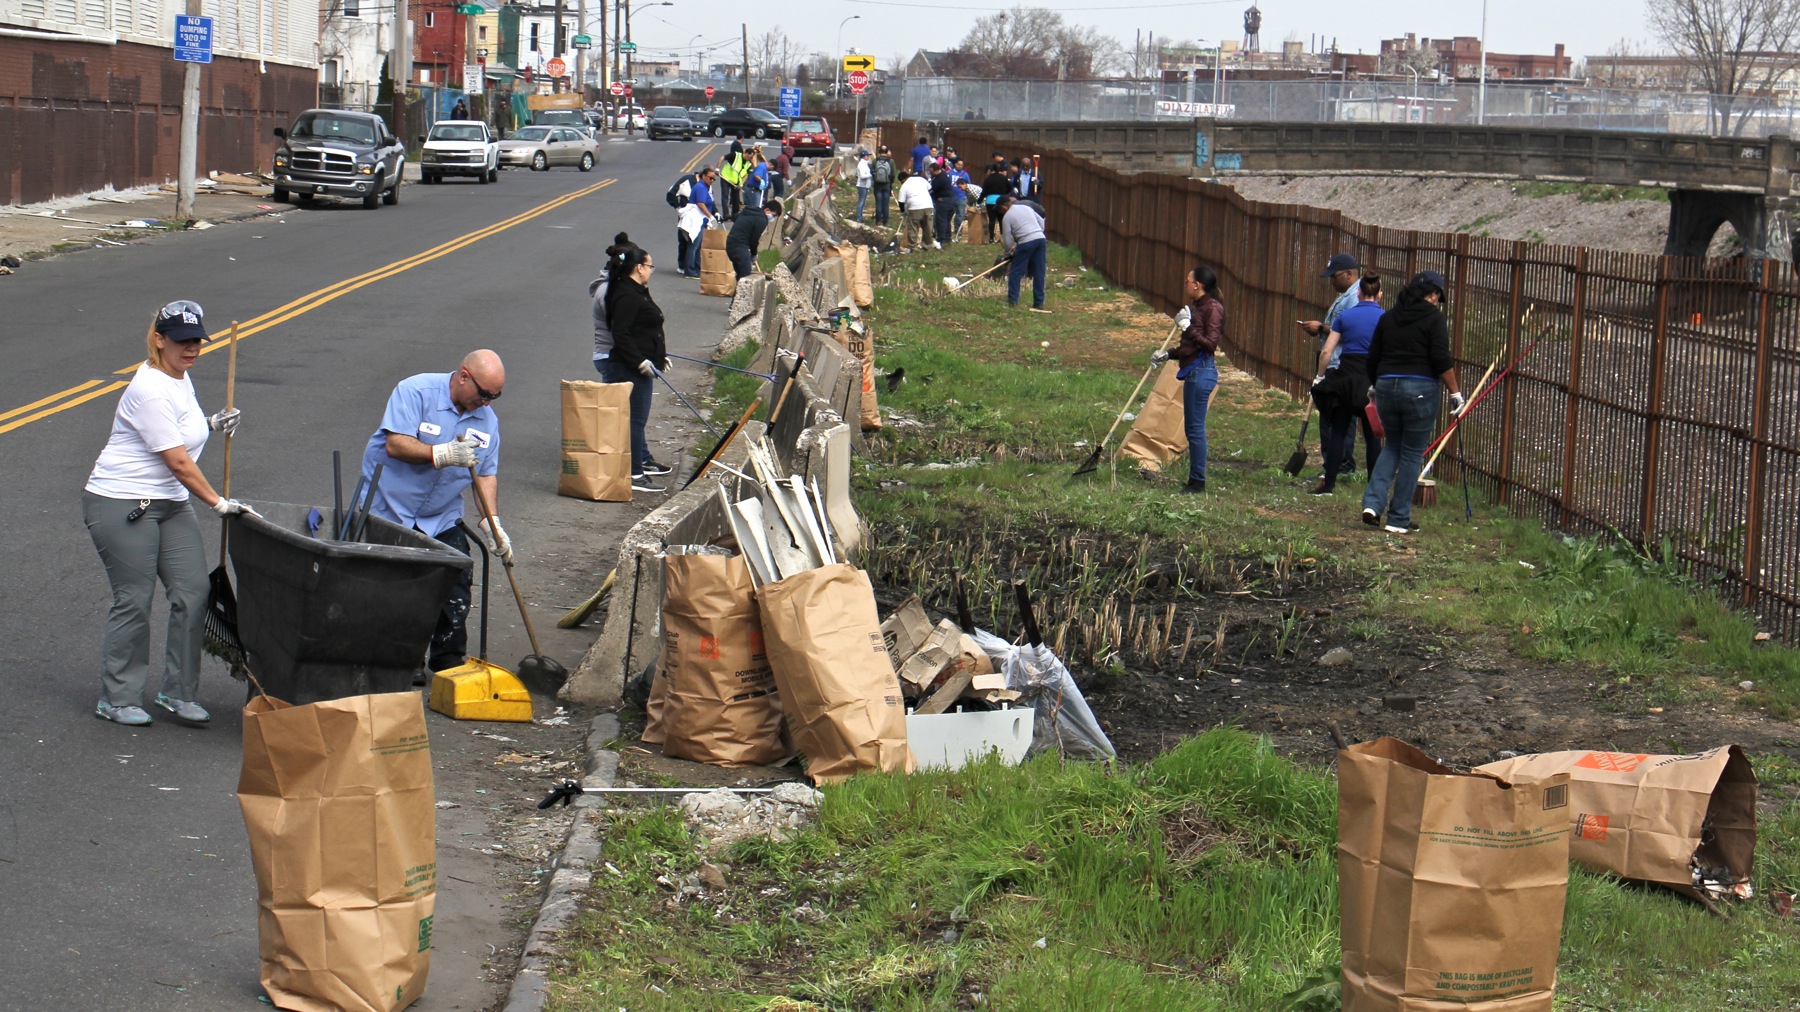 Workers and volunteers clean up trash in preparation for a new greenway alongside the former site of a notorious Kensington heroin encampment. (Emma Lee/WHYY)